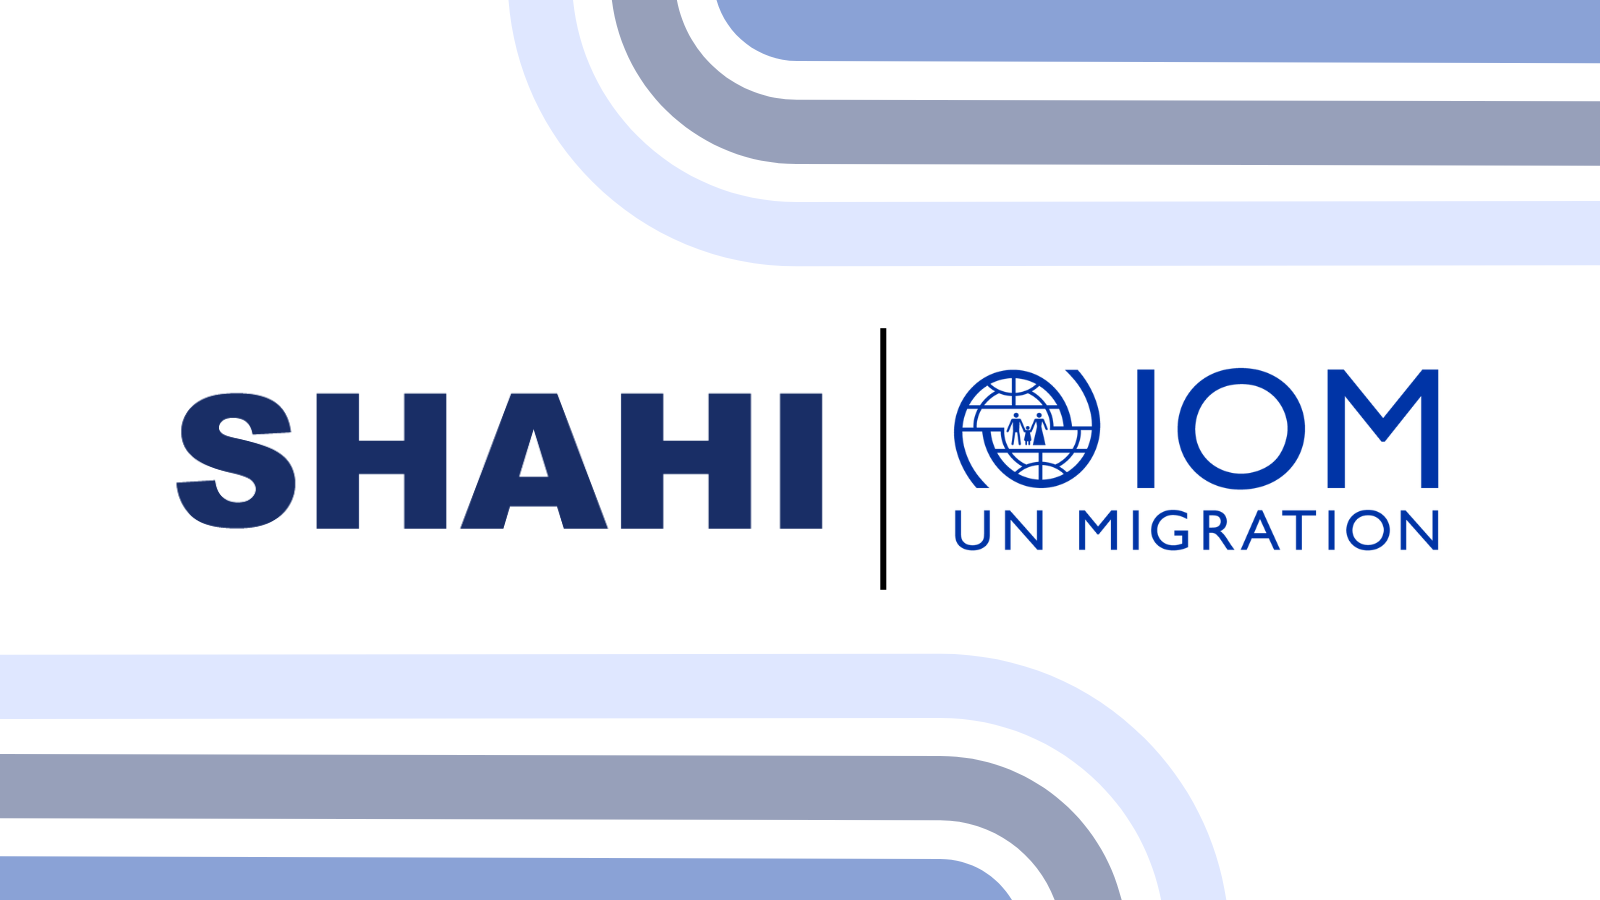 IOM-UN Migration And Shahi Exports Join Hands To Facilitate Safe Migration Through Migrant Support Centre